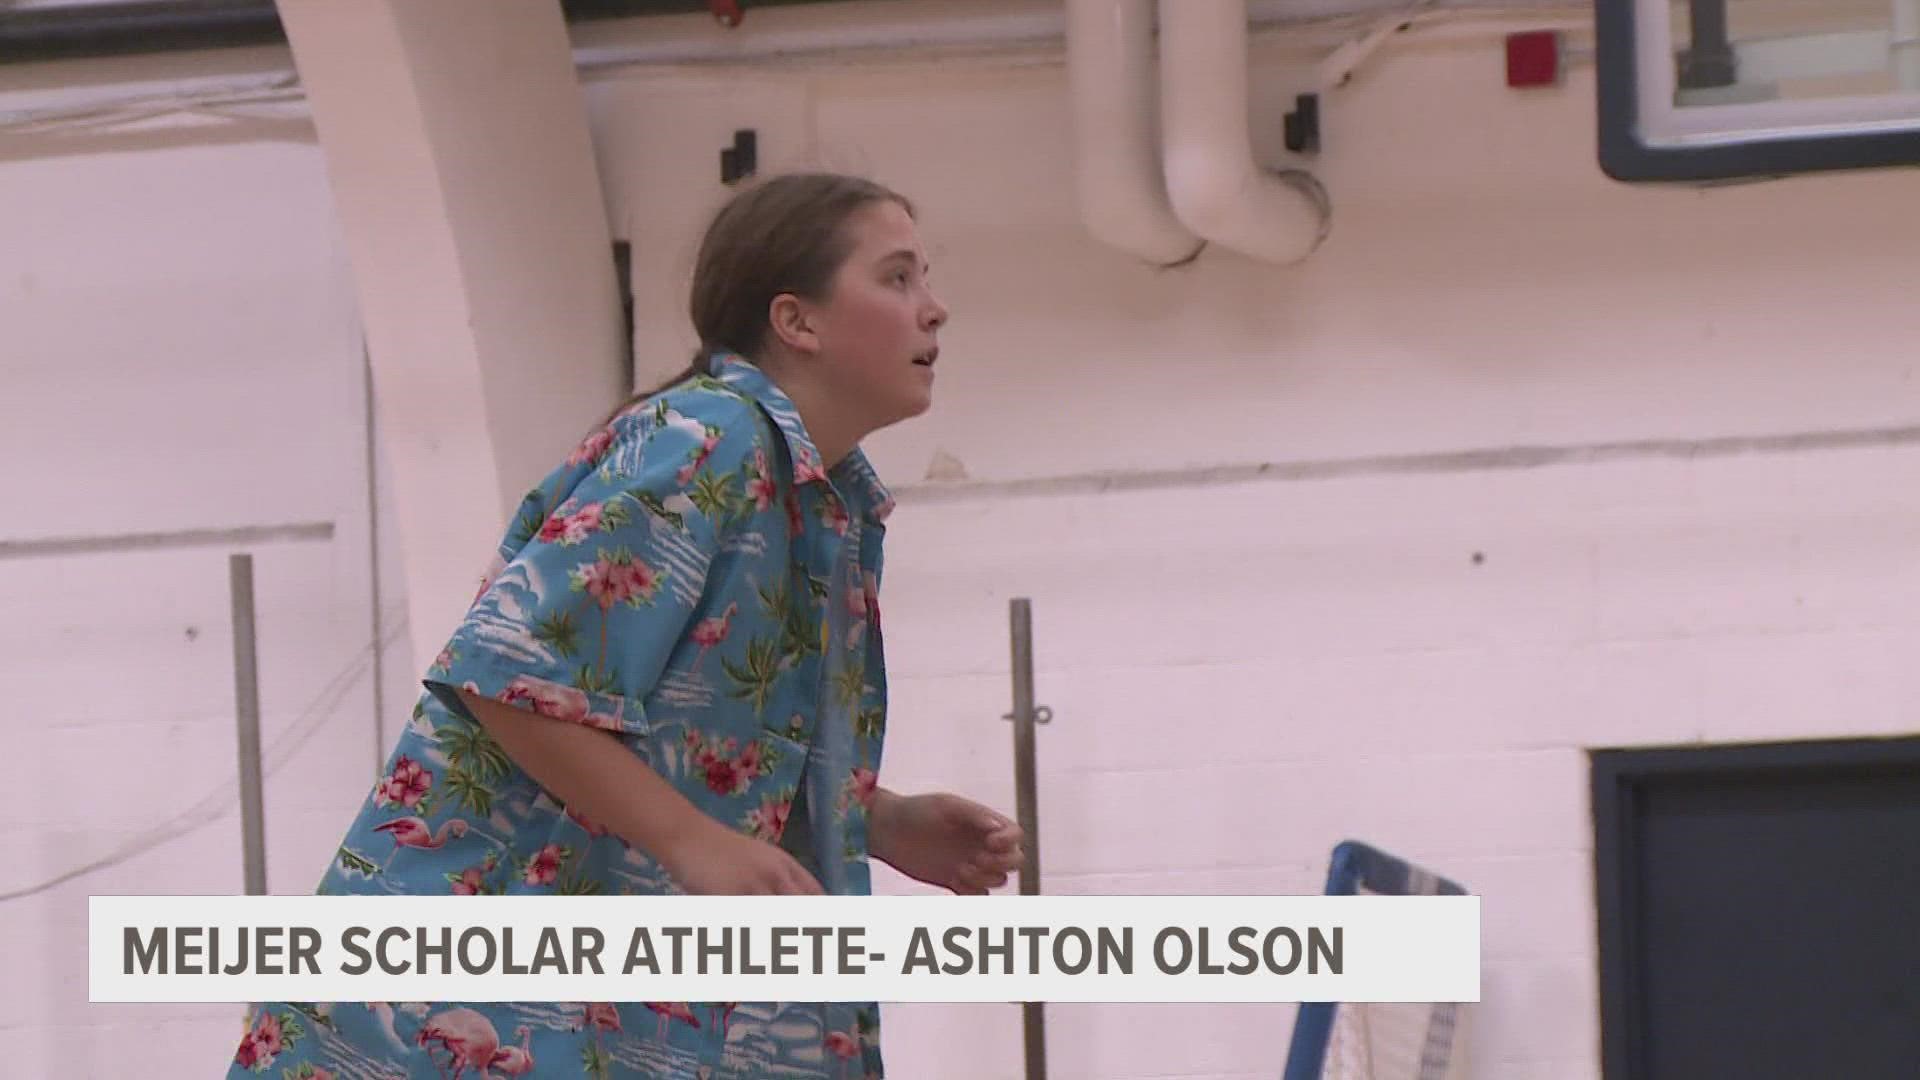 This week's Meijer Scholar Athlete is a do-it-all kind of person on the court, on the diamond and in the classroom.